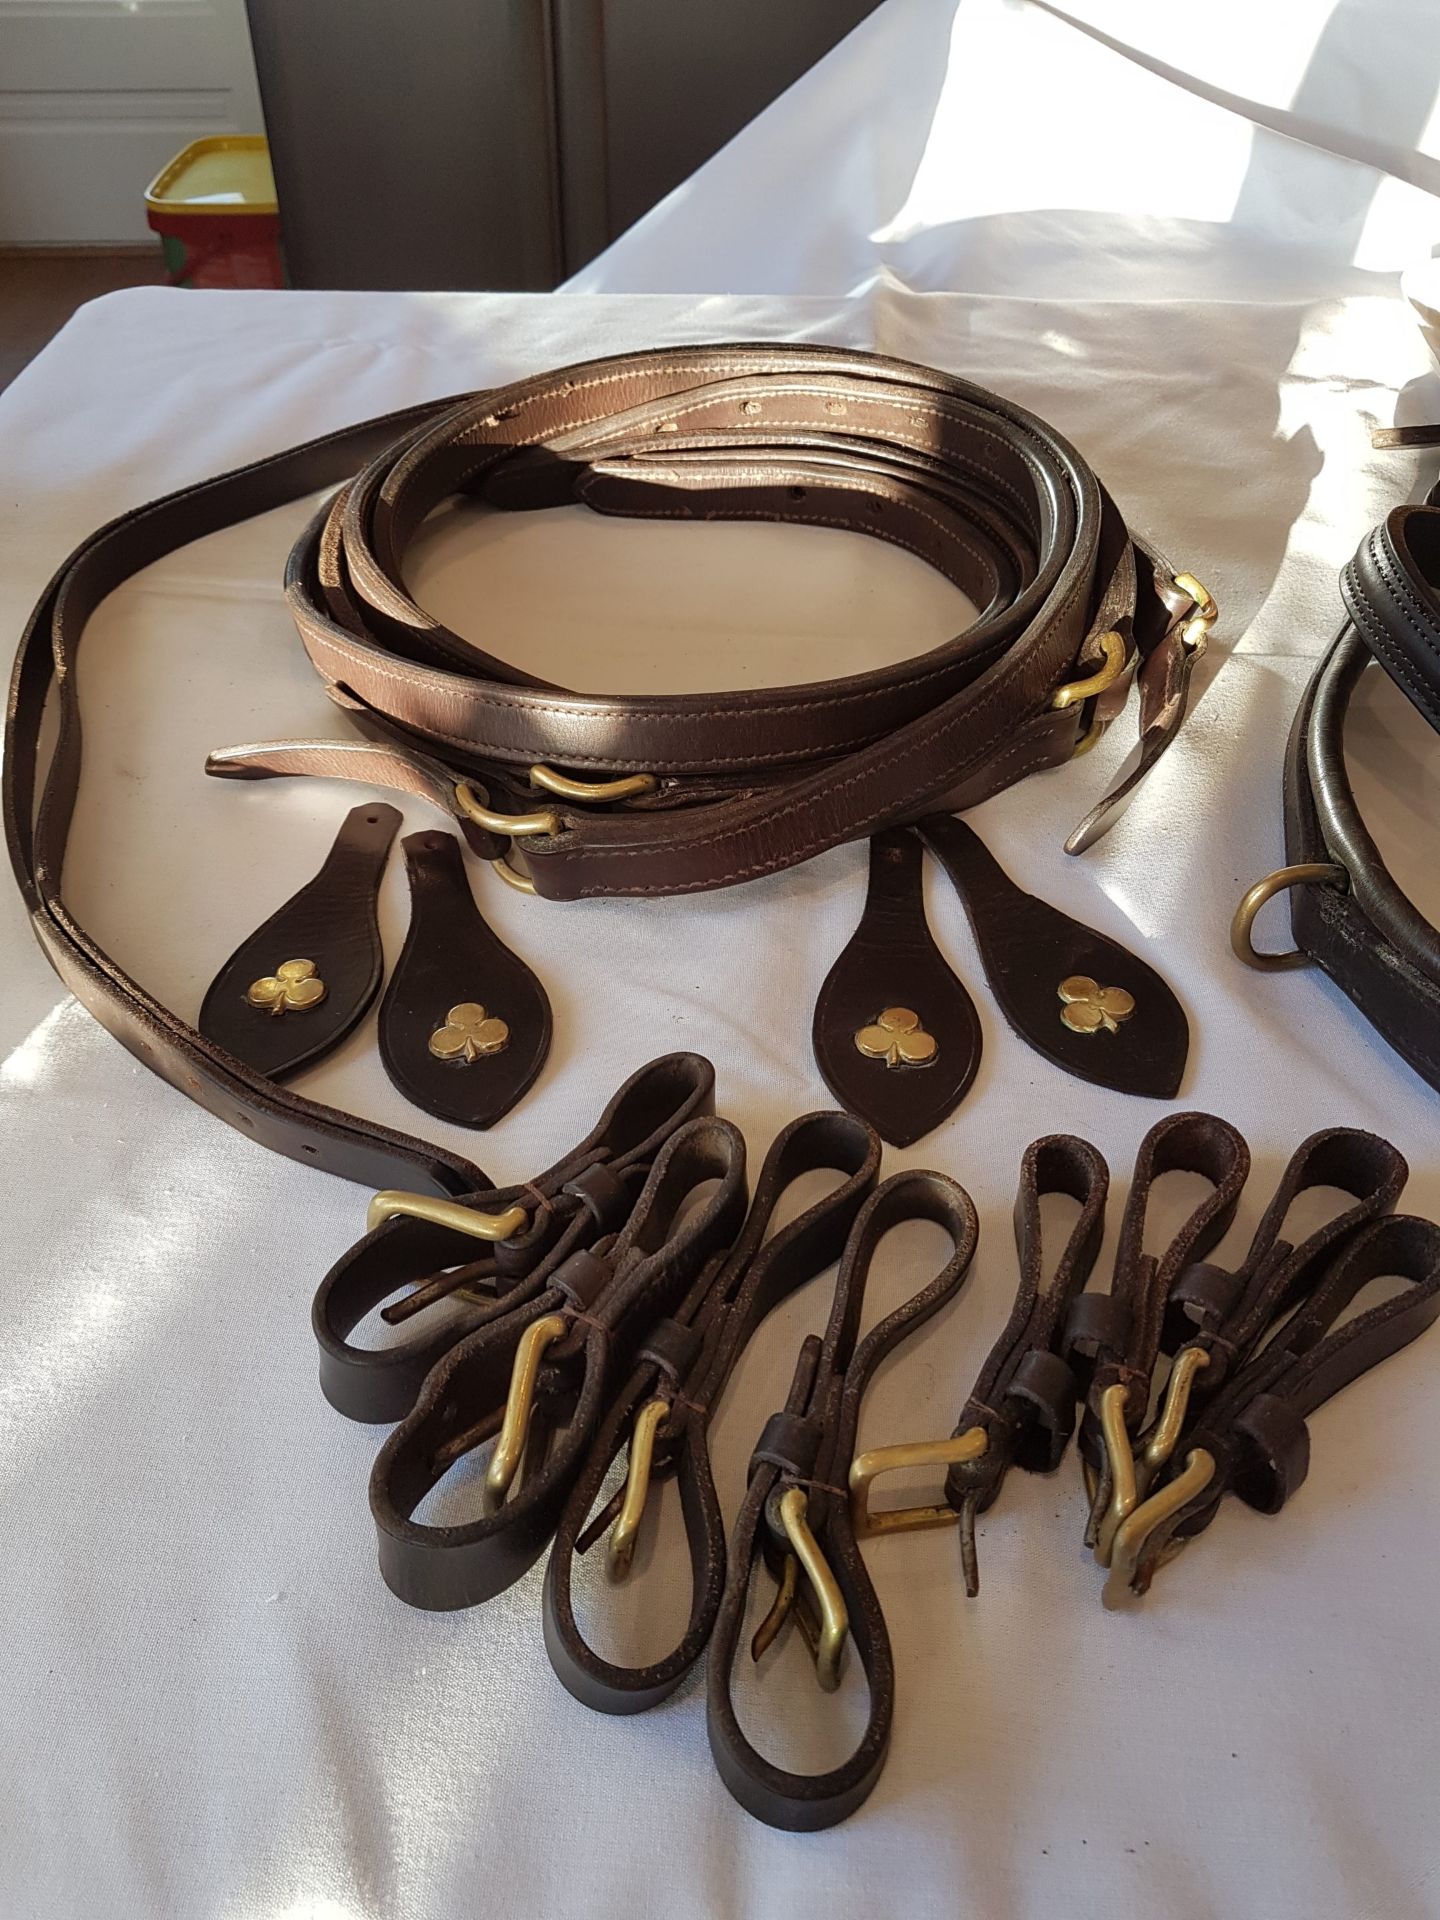 Small Shetland pony Pair set of brown English leather breast collar harness - Image 3 of 3